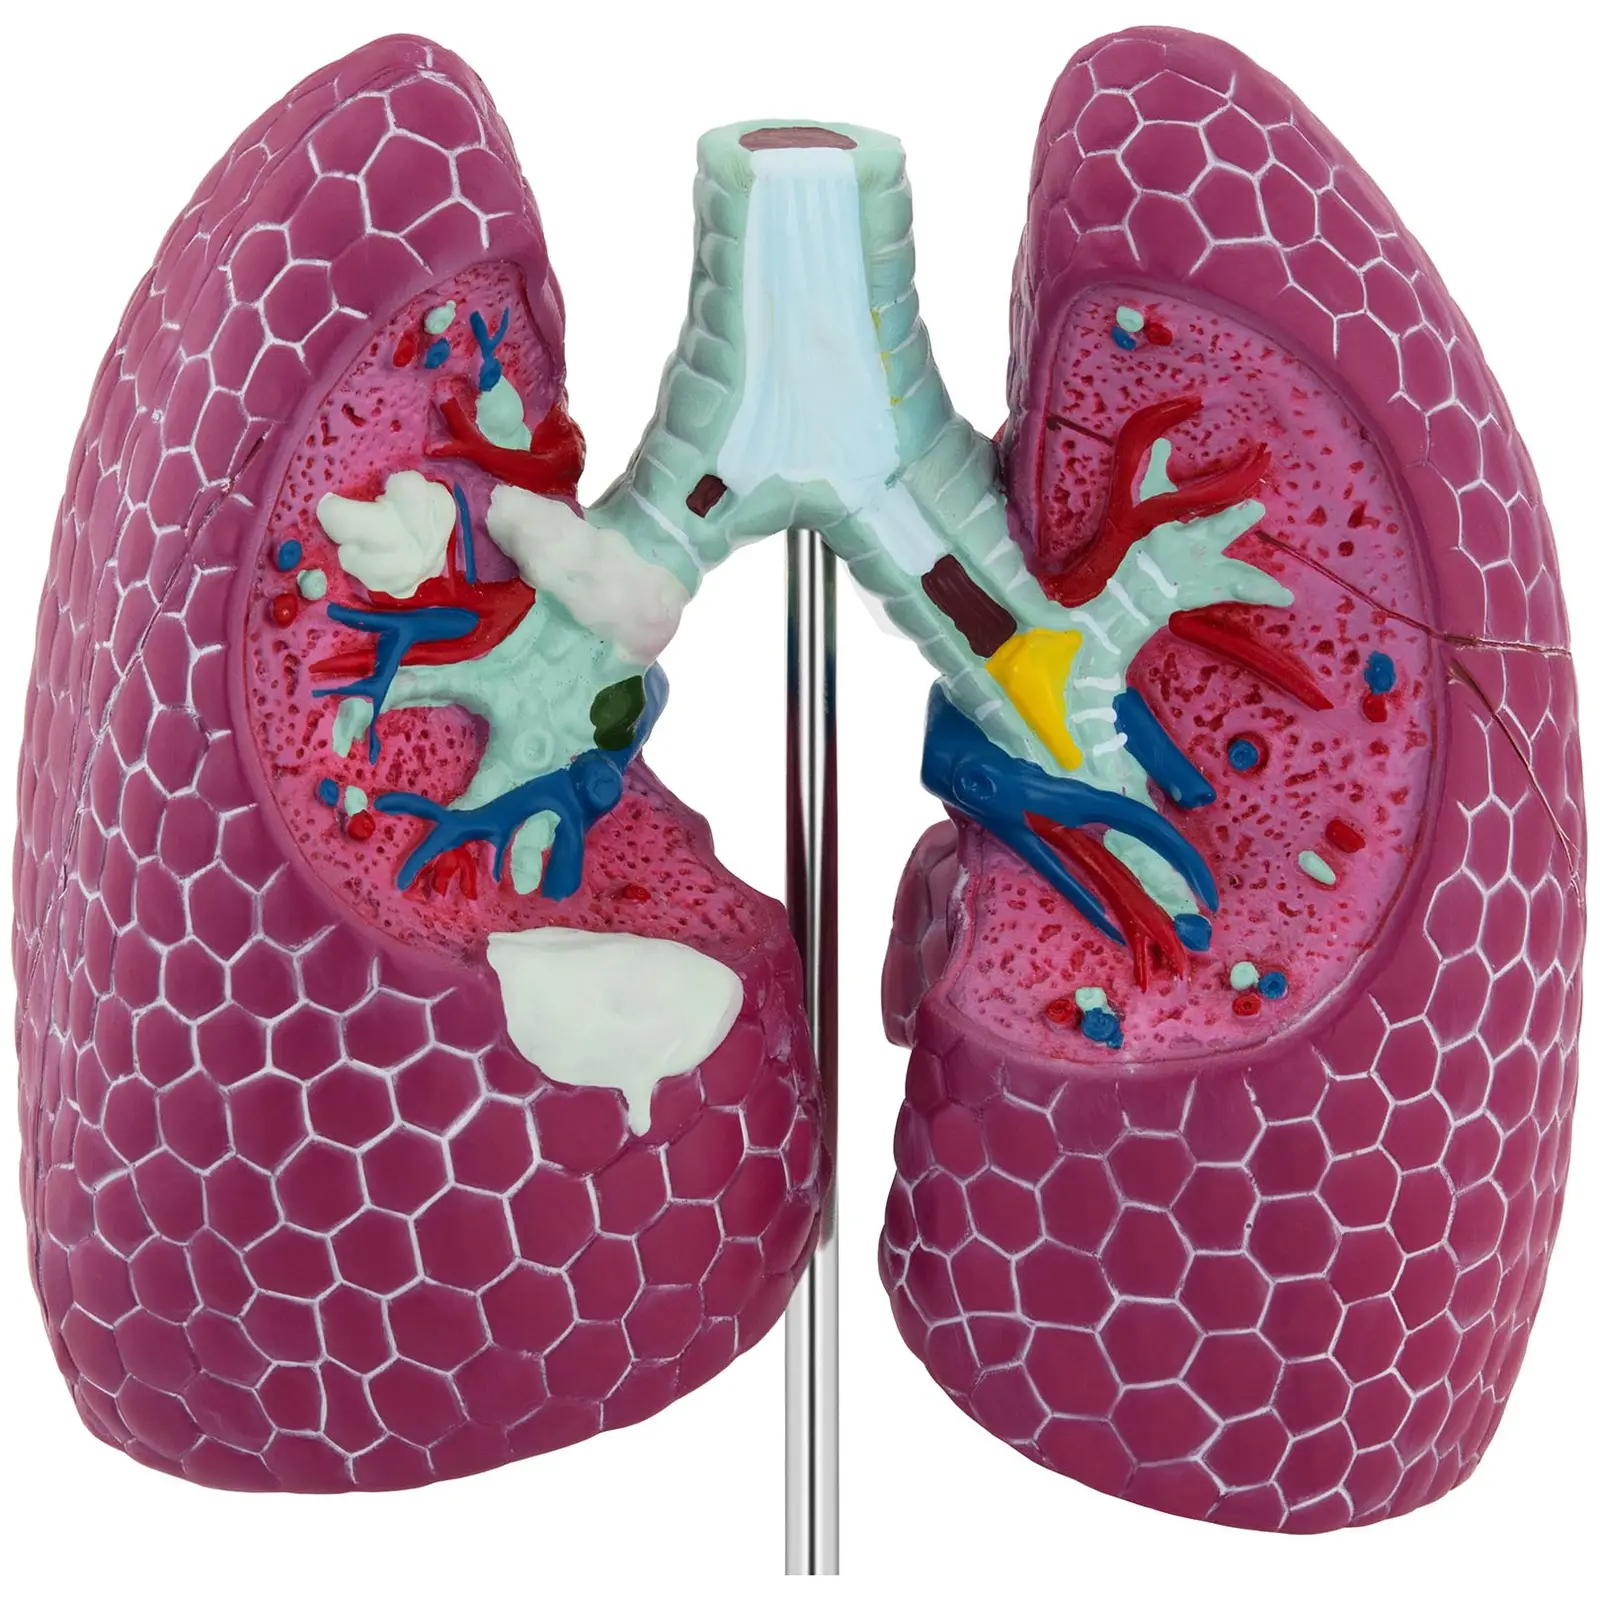 Lung Model - with pathologies